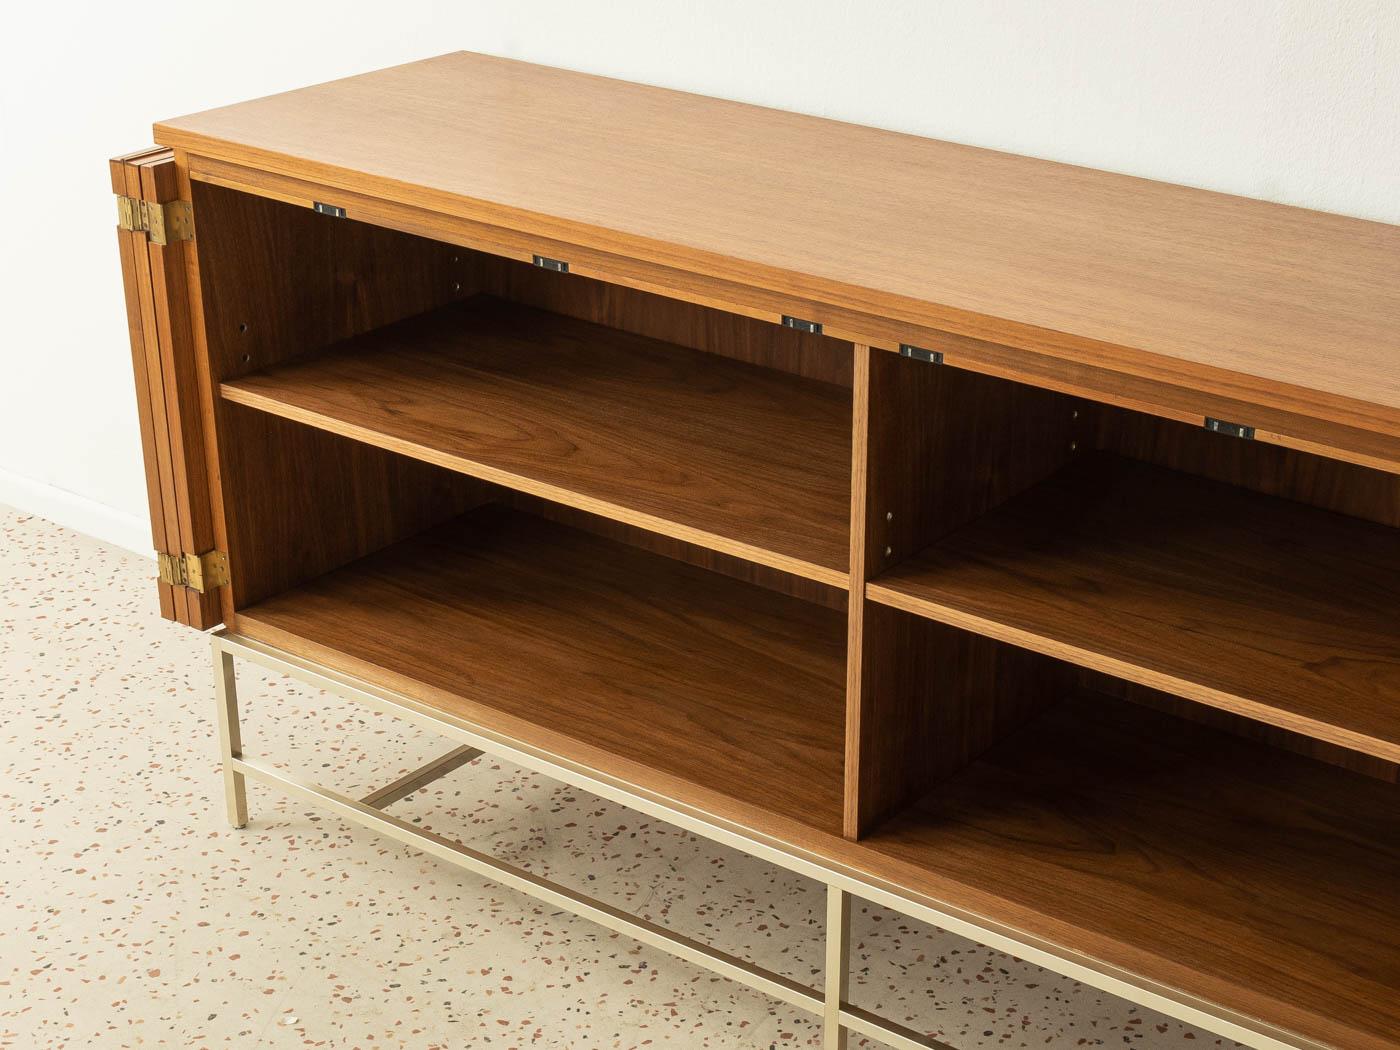 Mid-20th Century Paul McCobb Sideboard Manufactured by Wk Möbel, 1950s, Made in Germany